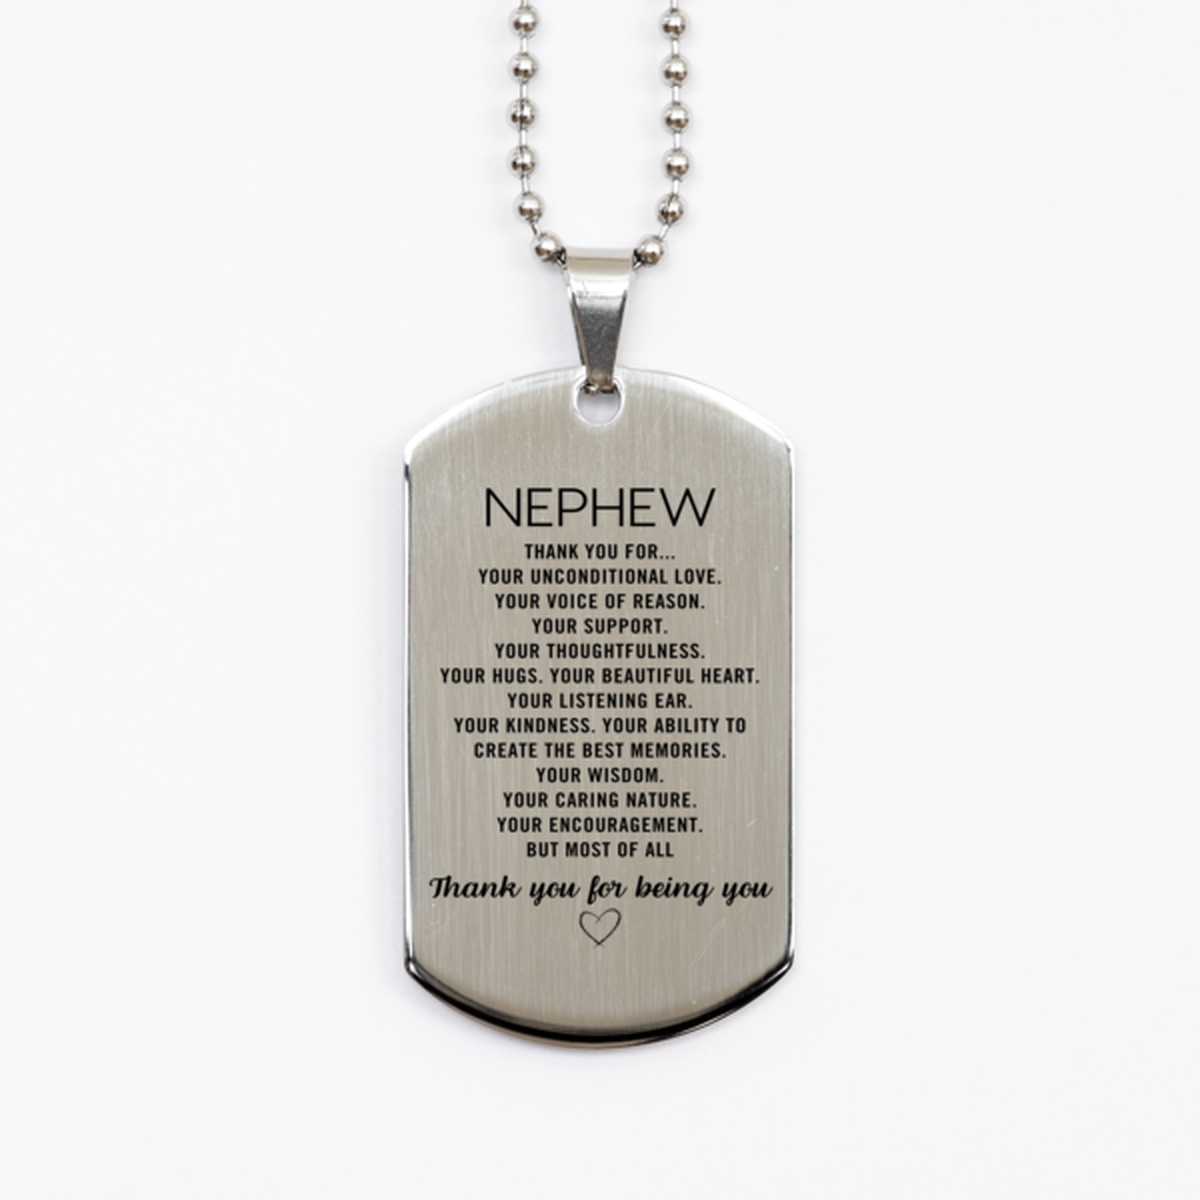 Nephew Silver Dog Tag Custom, Engraved Gifts For Nephew Christmas Graduation Birthday Gifts for Men Women Nephew Thank you for Your unconditional love